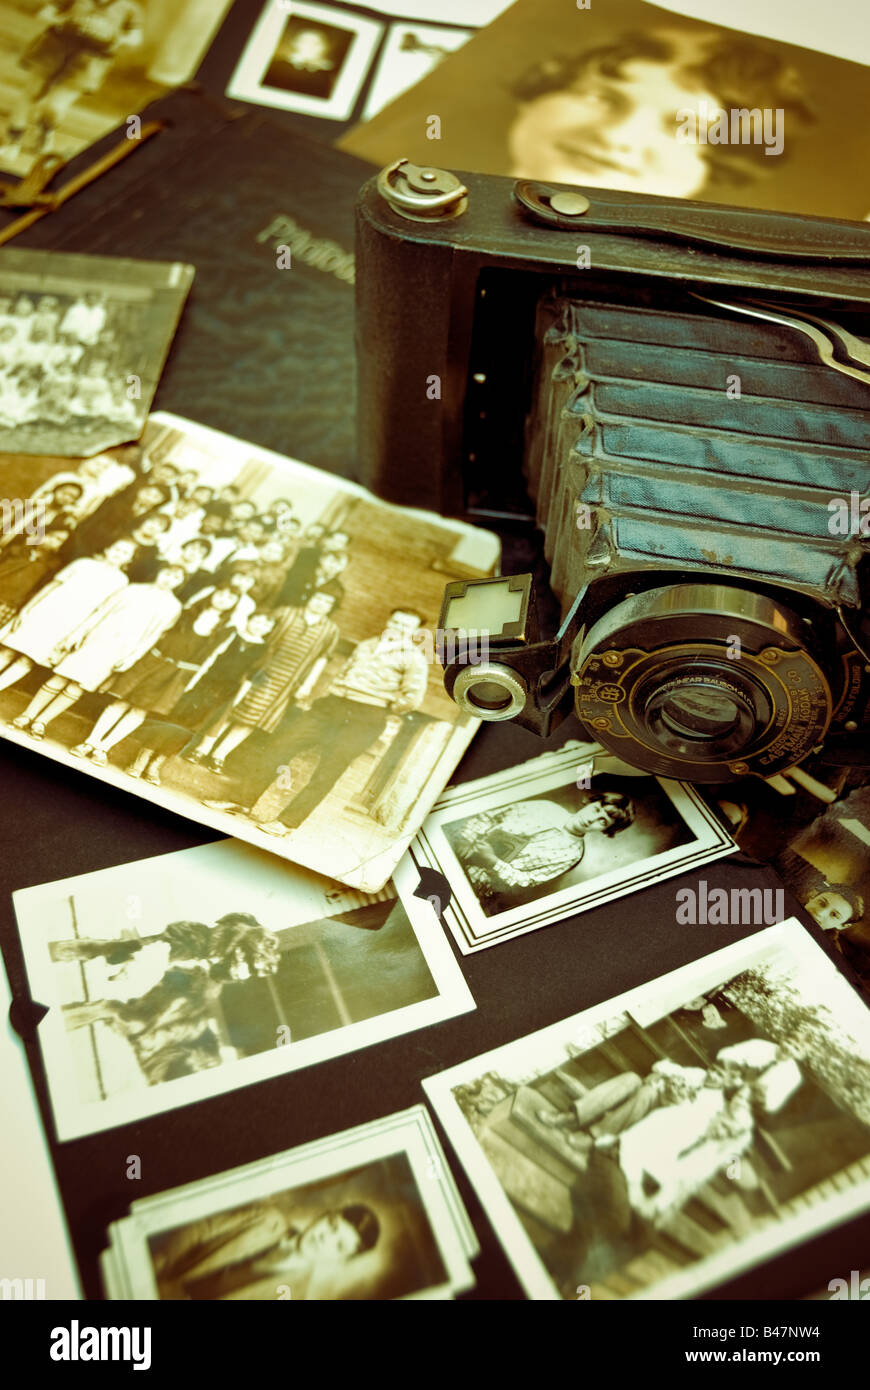 An antique Eastman Kodak Brownie camera and vintage family and class photographs create a nostalgic feeling. Stock Photo